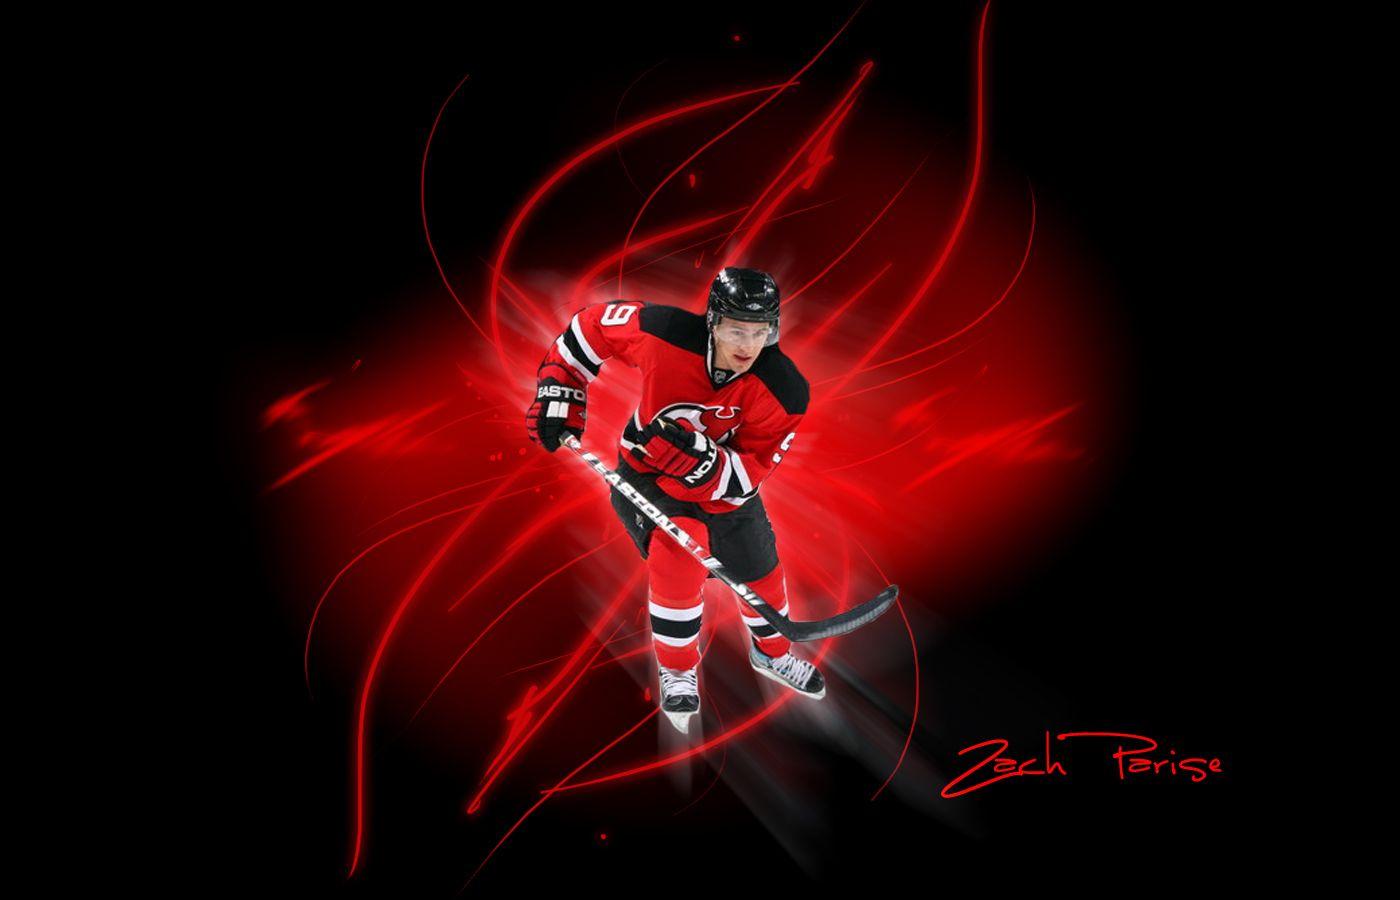 The NHL image Zach Parise Wallpaper HD wallpaper and background